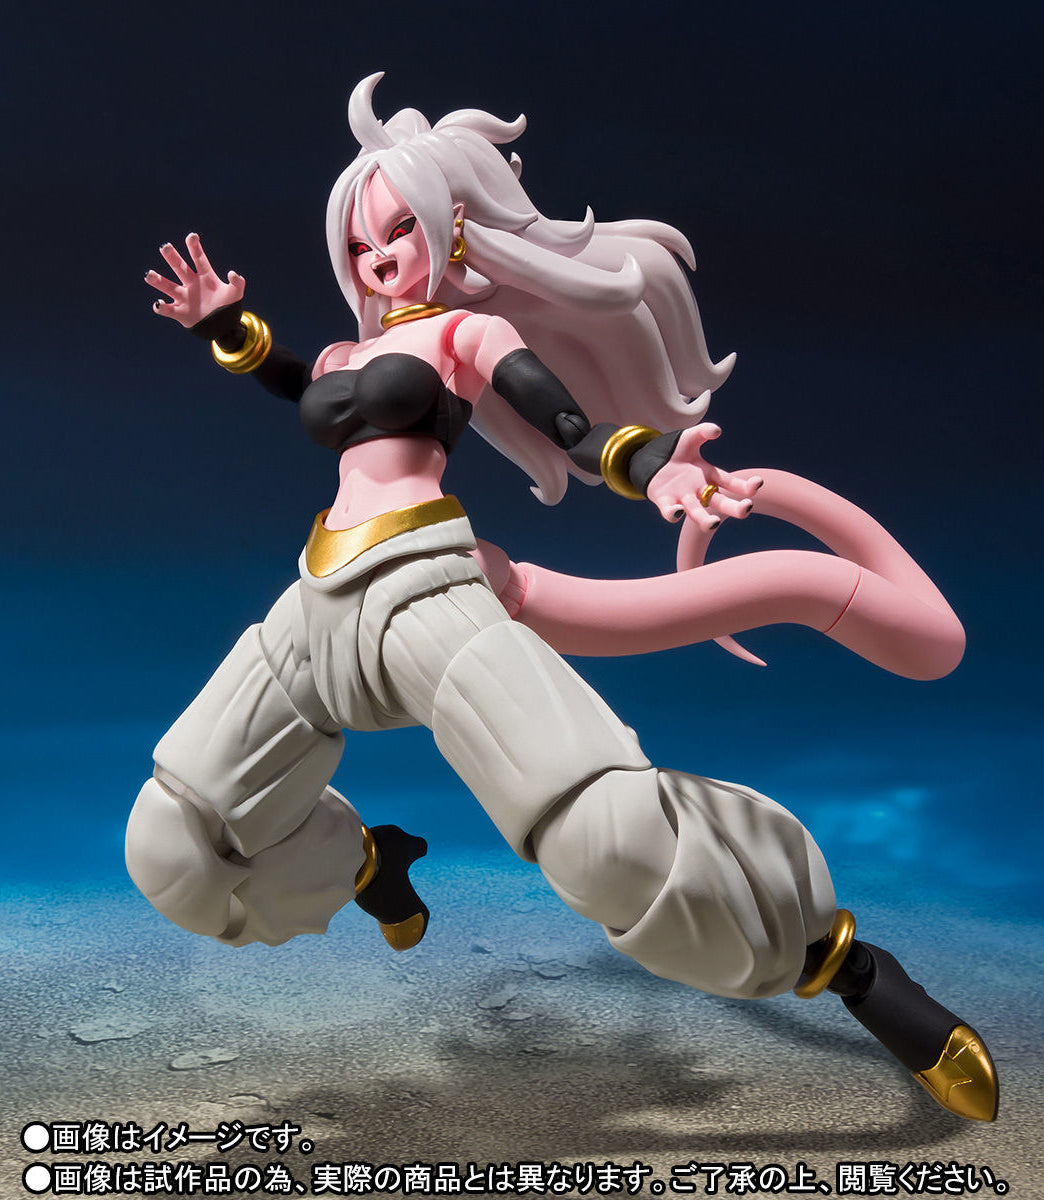 Android 21 (Lab Coat) Coming Soon to S.H.Figuarts!]